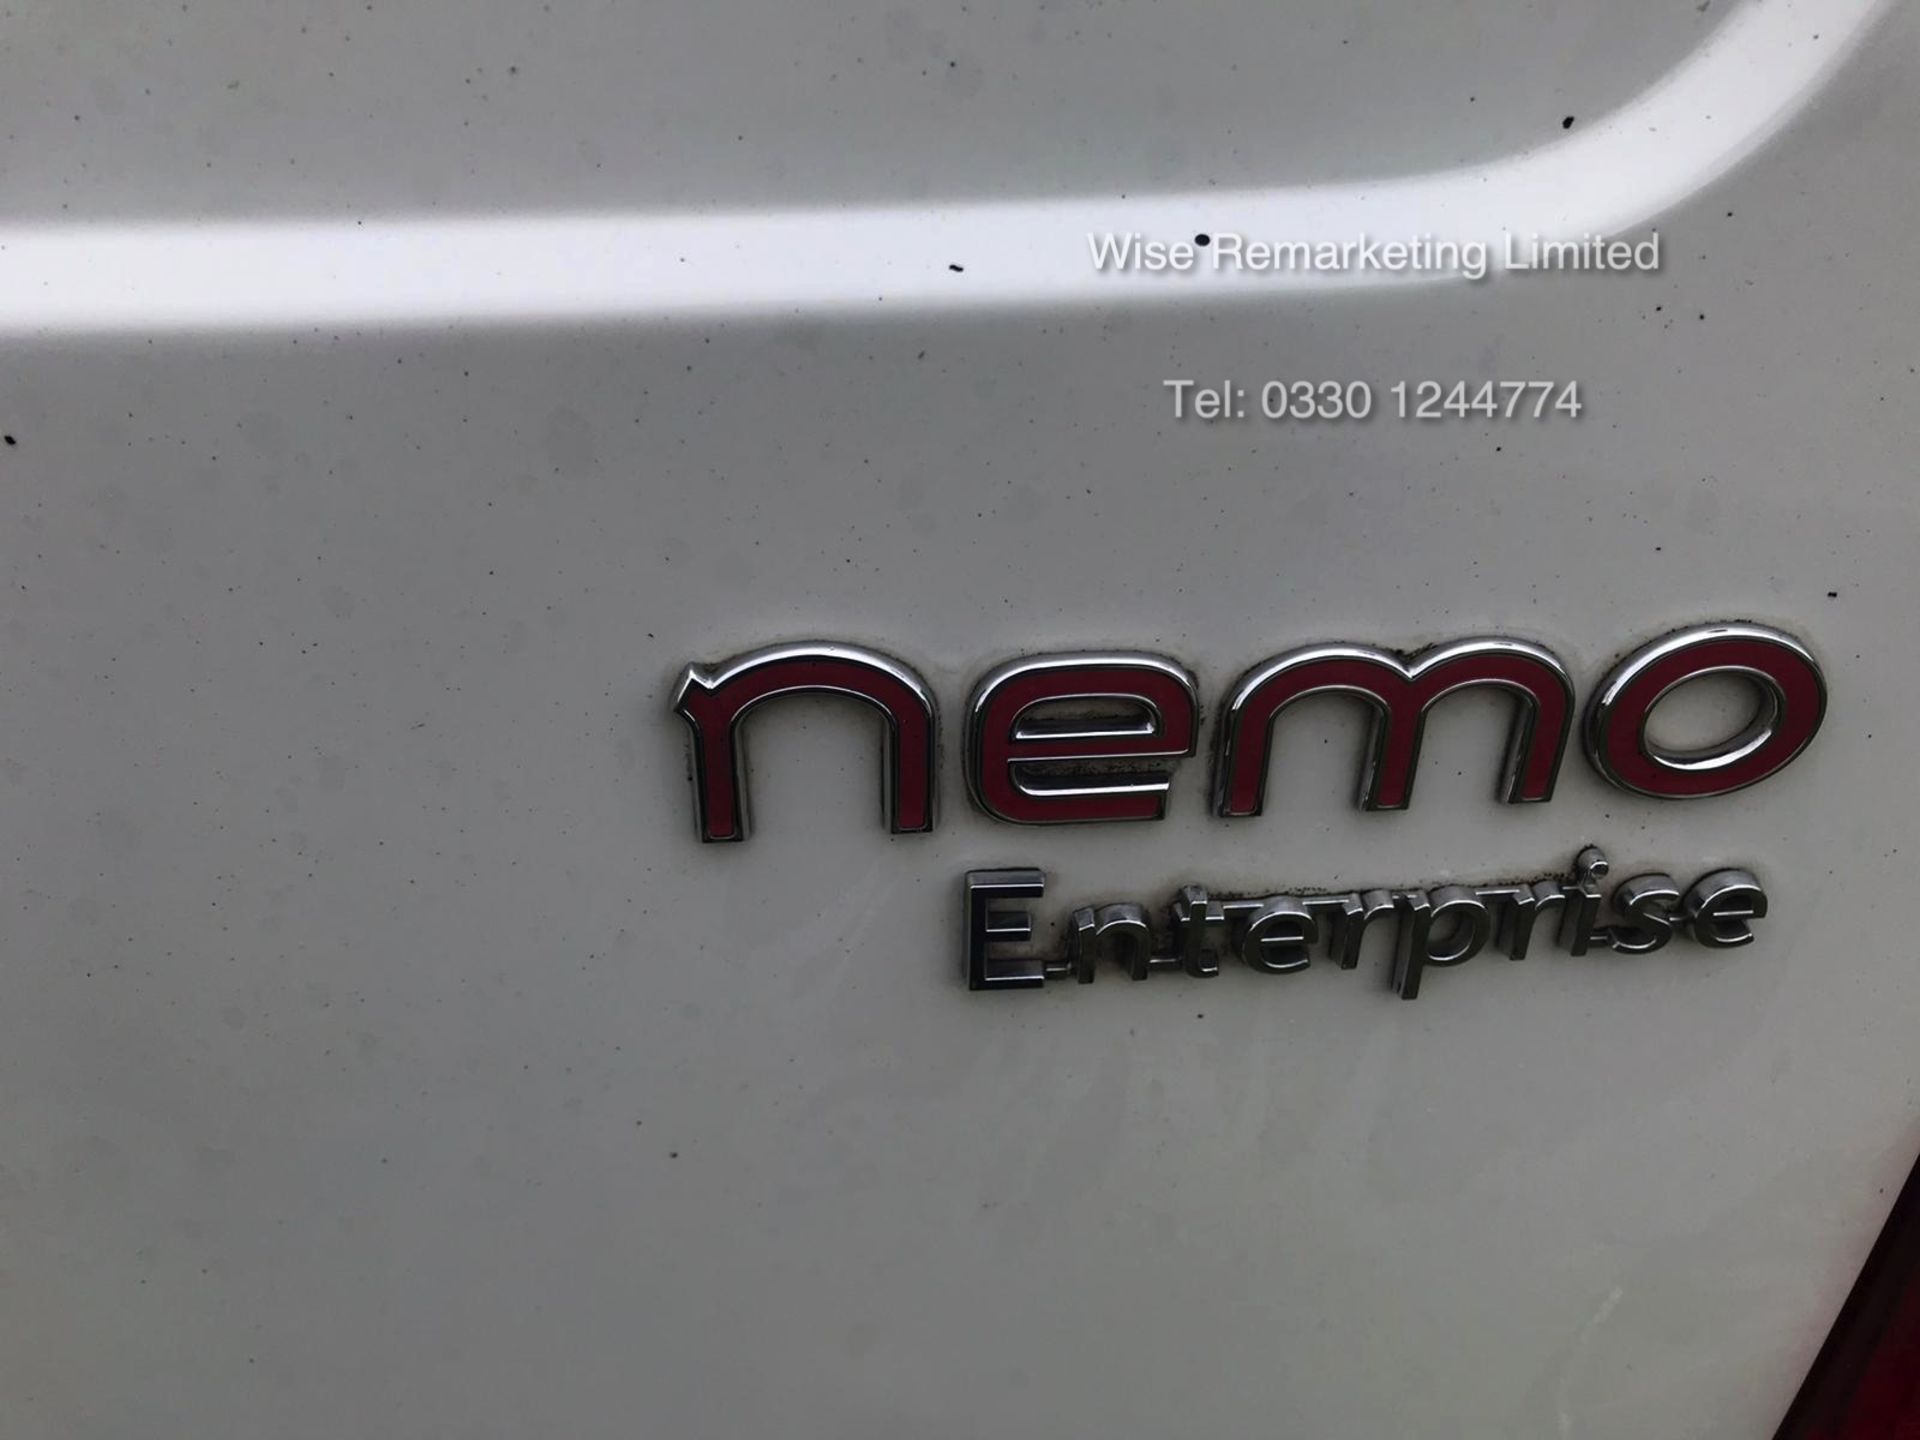 Citroen Nemo 660 Enterprise 1.3 DHi - 2014 14 Reg - 1 Owner From New - Air Con - Image 7 of 17